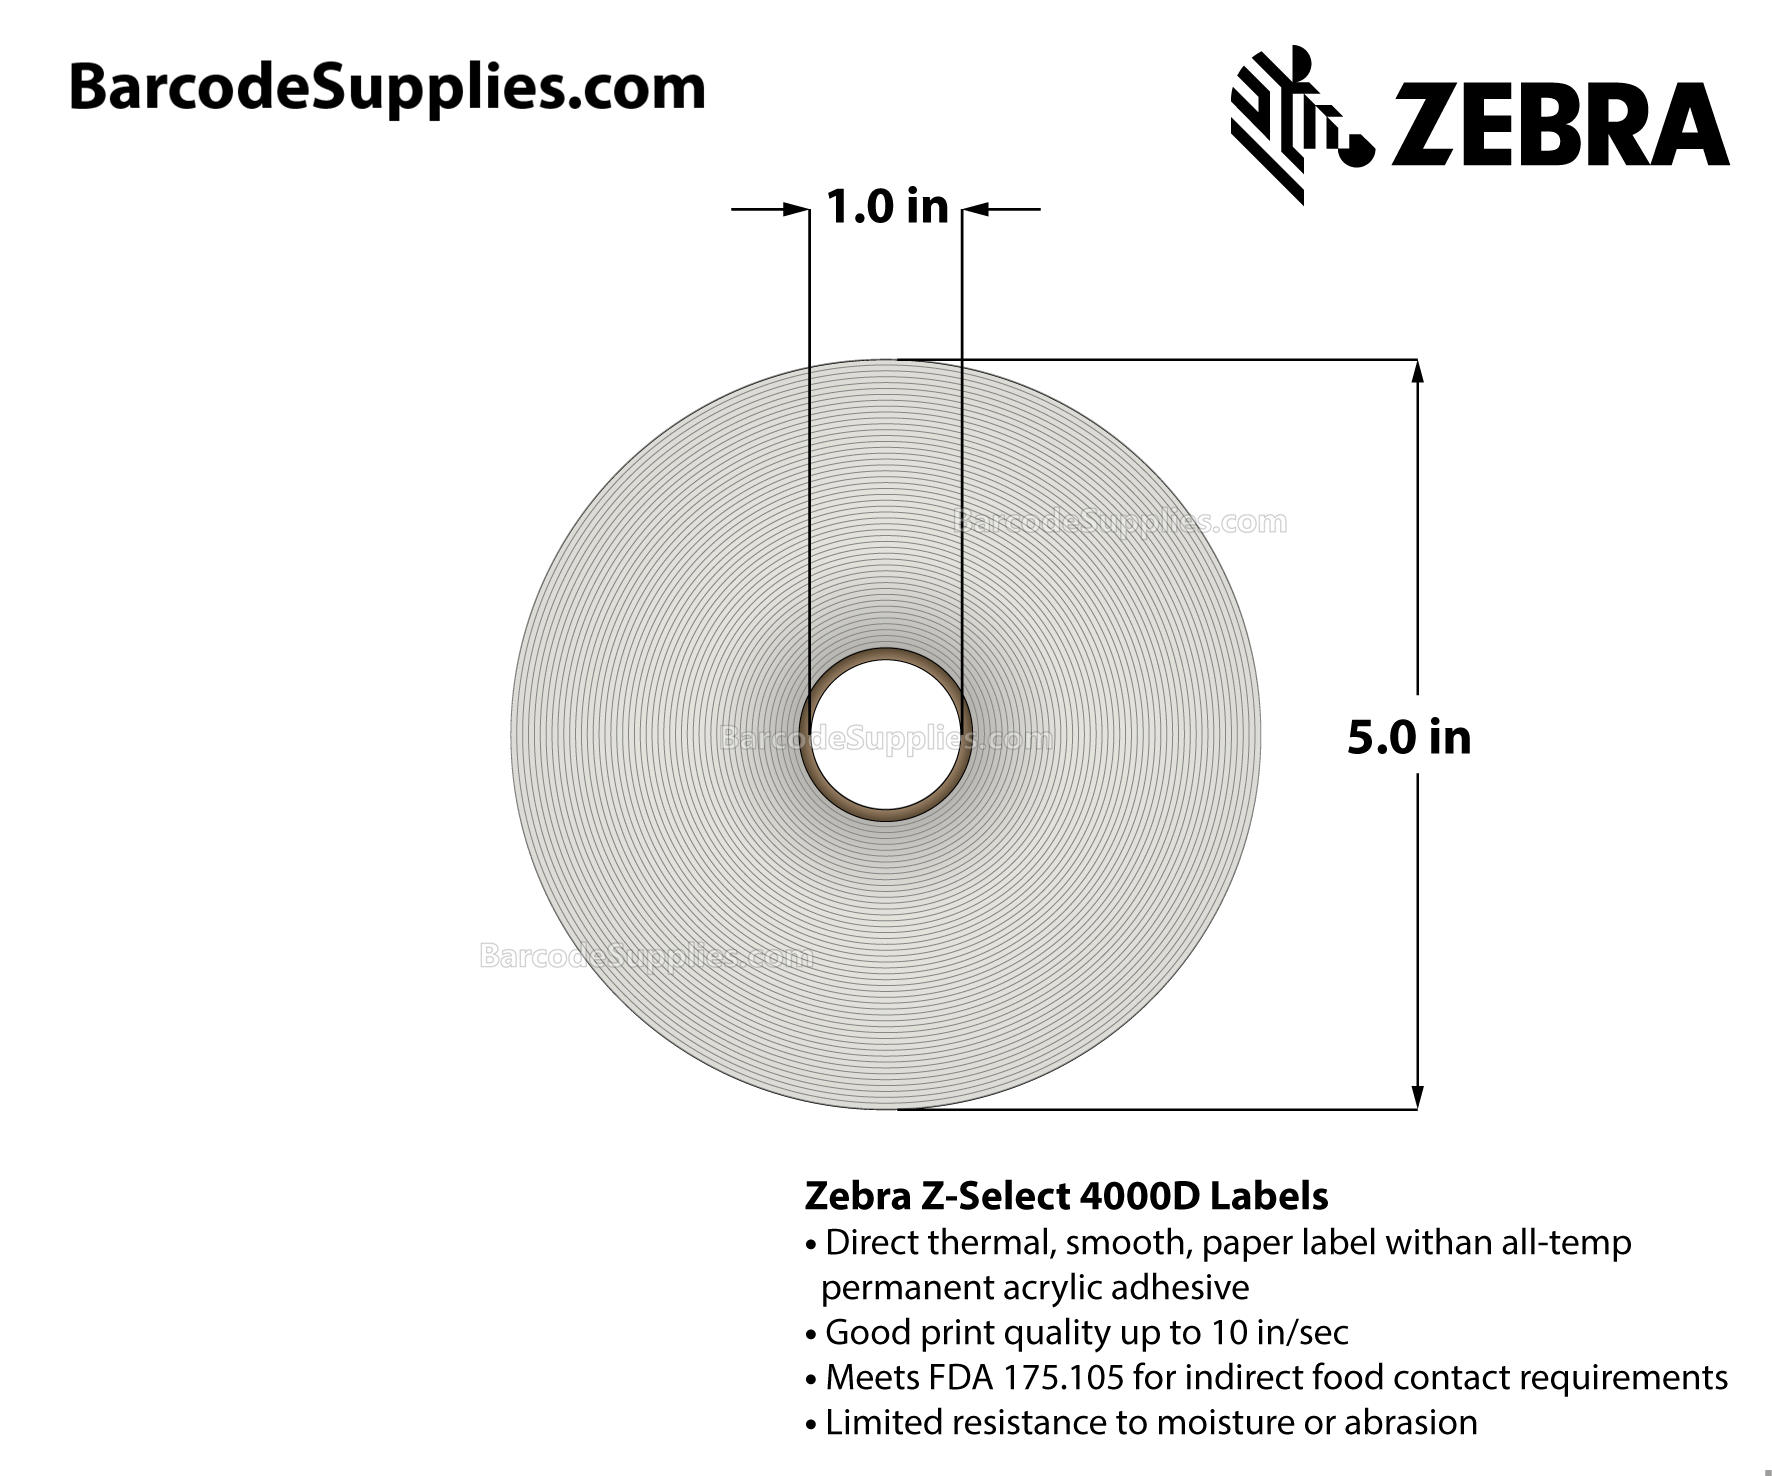 4 x 2 Direct Thermal White Z-Select 4000D Labels With All-Temp Adhesive - Perforated - 1240 Labels Per Roll - Carton Of 6 Rolls - 7440 Labels Total - MPN: 10010047